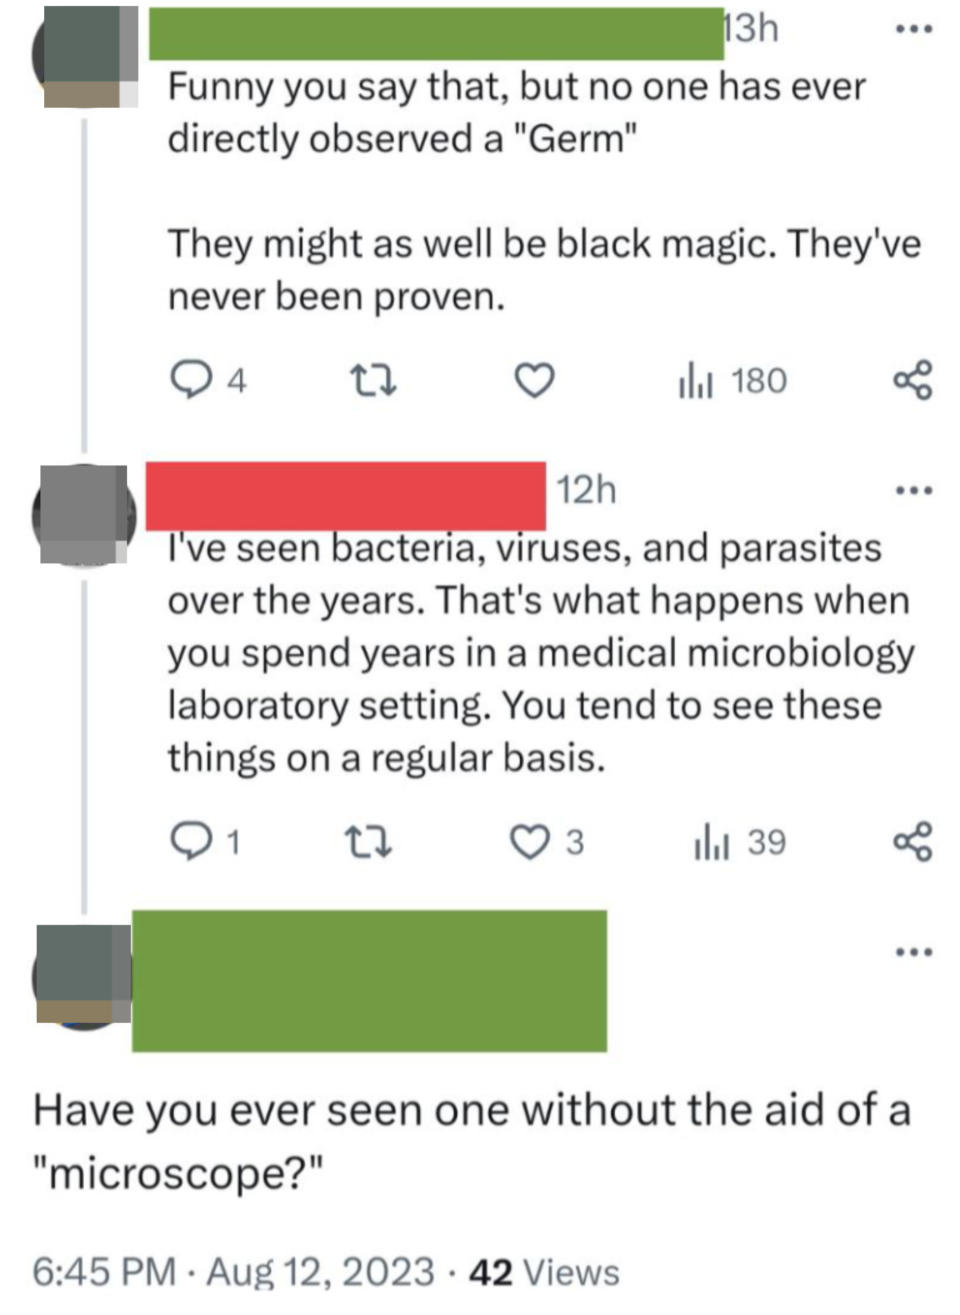 Person says germs may be black magic because 